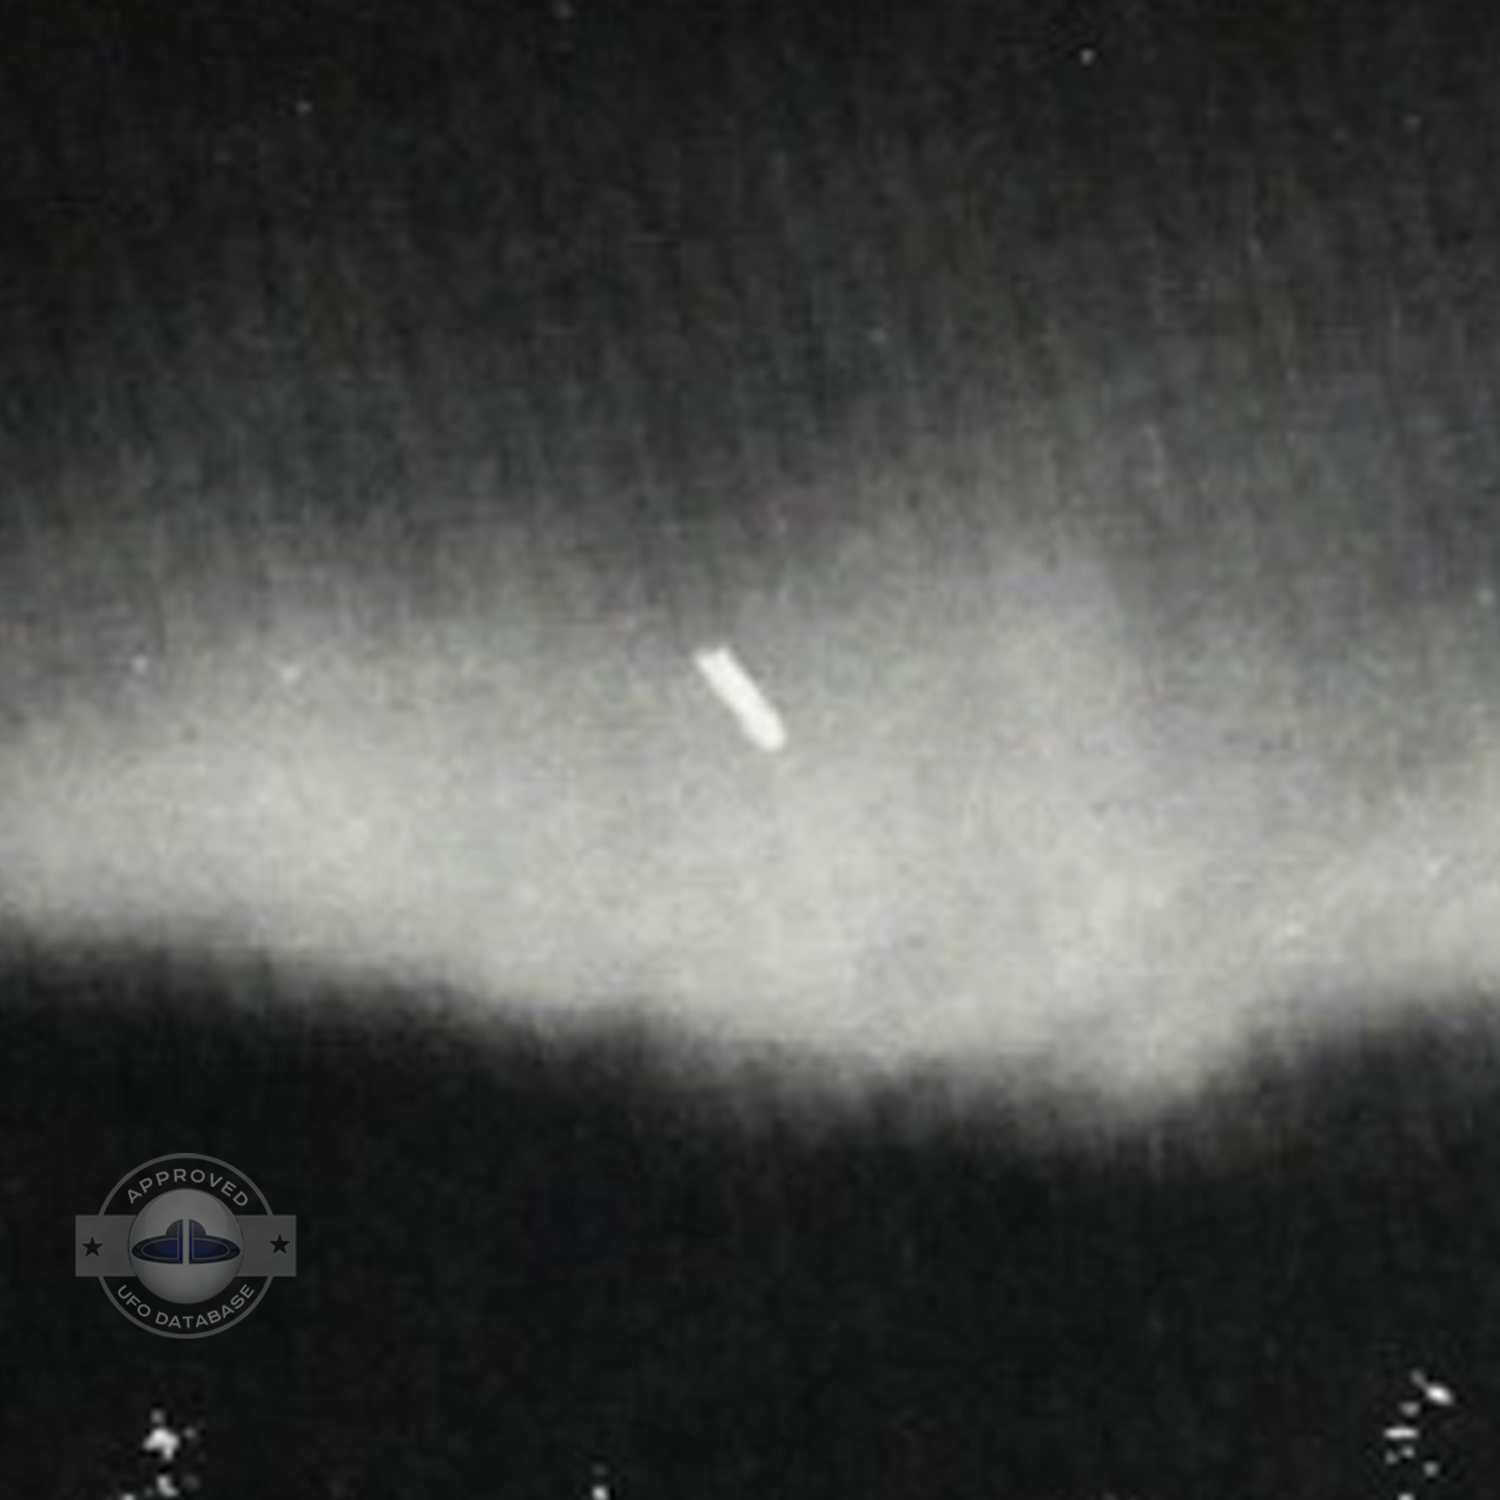 Tube shaped UFO - We can see the black hole at the end | New York UFO Picture #114-5